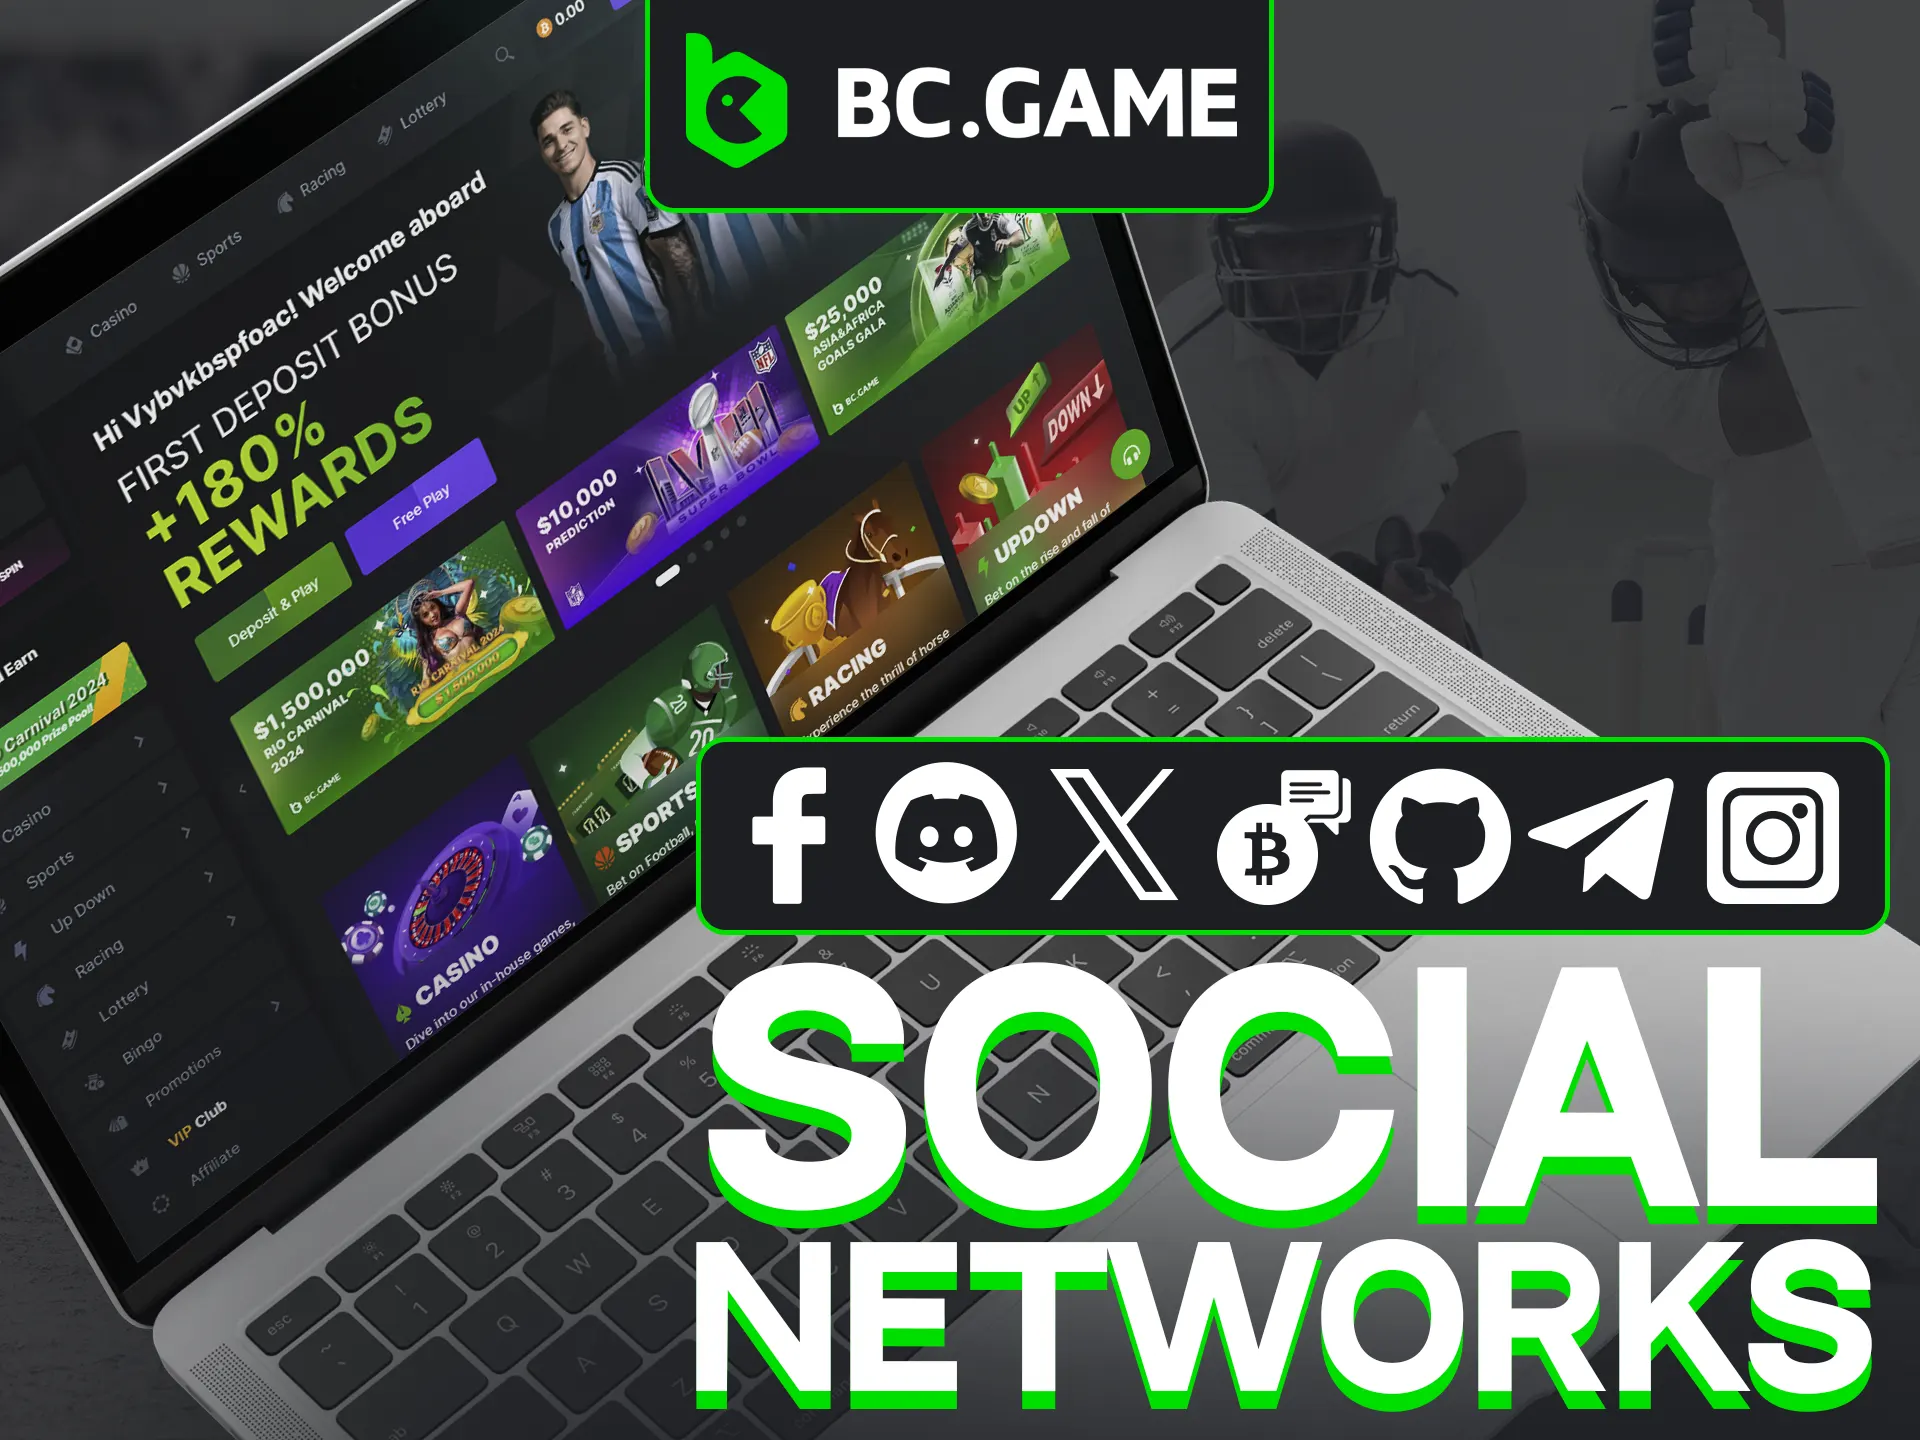 Connect with BC Game through social media.